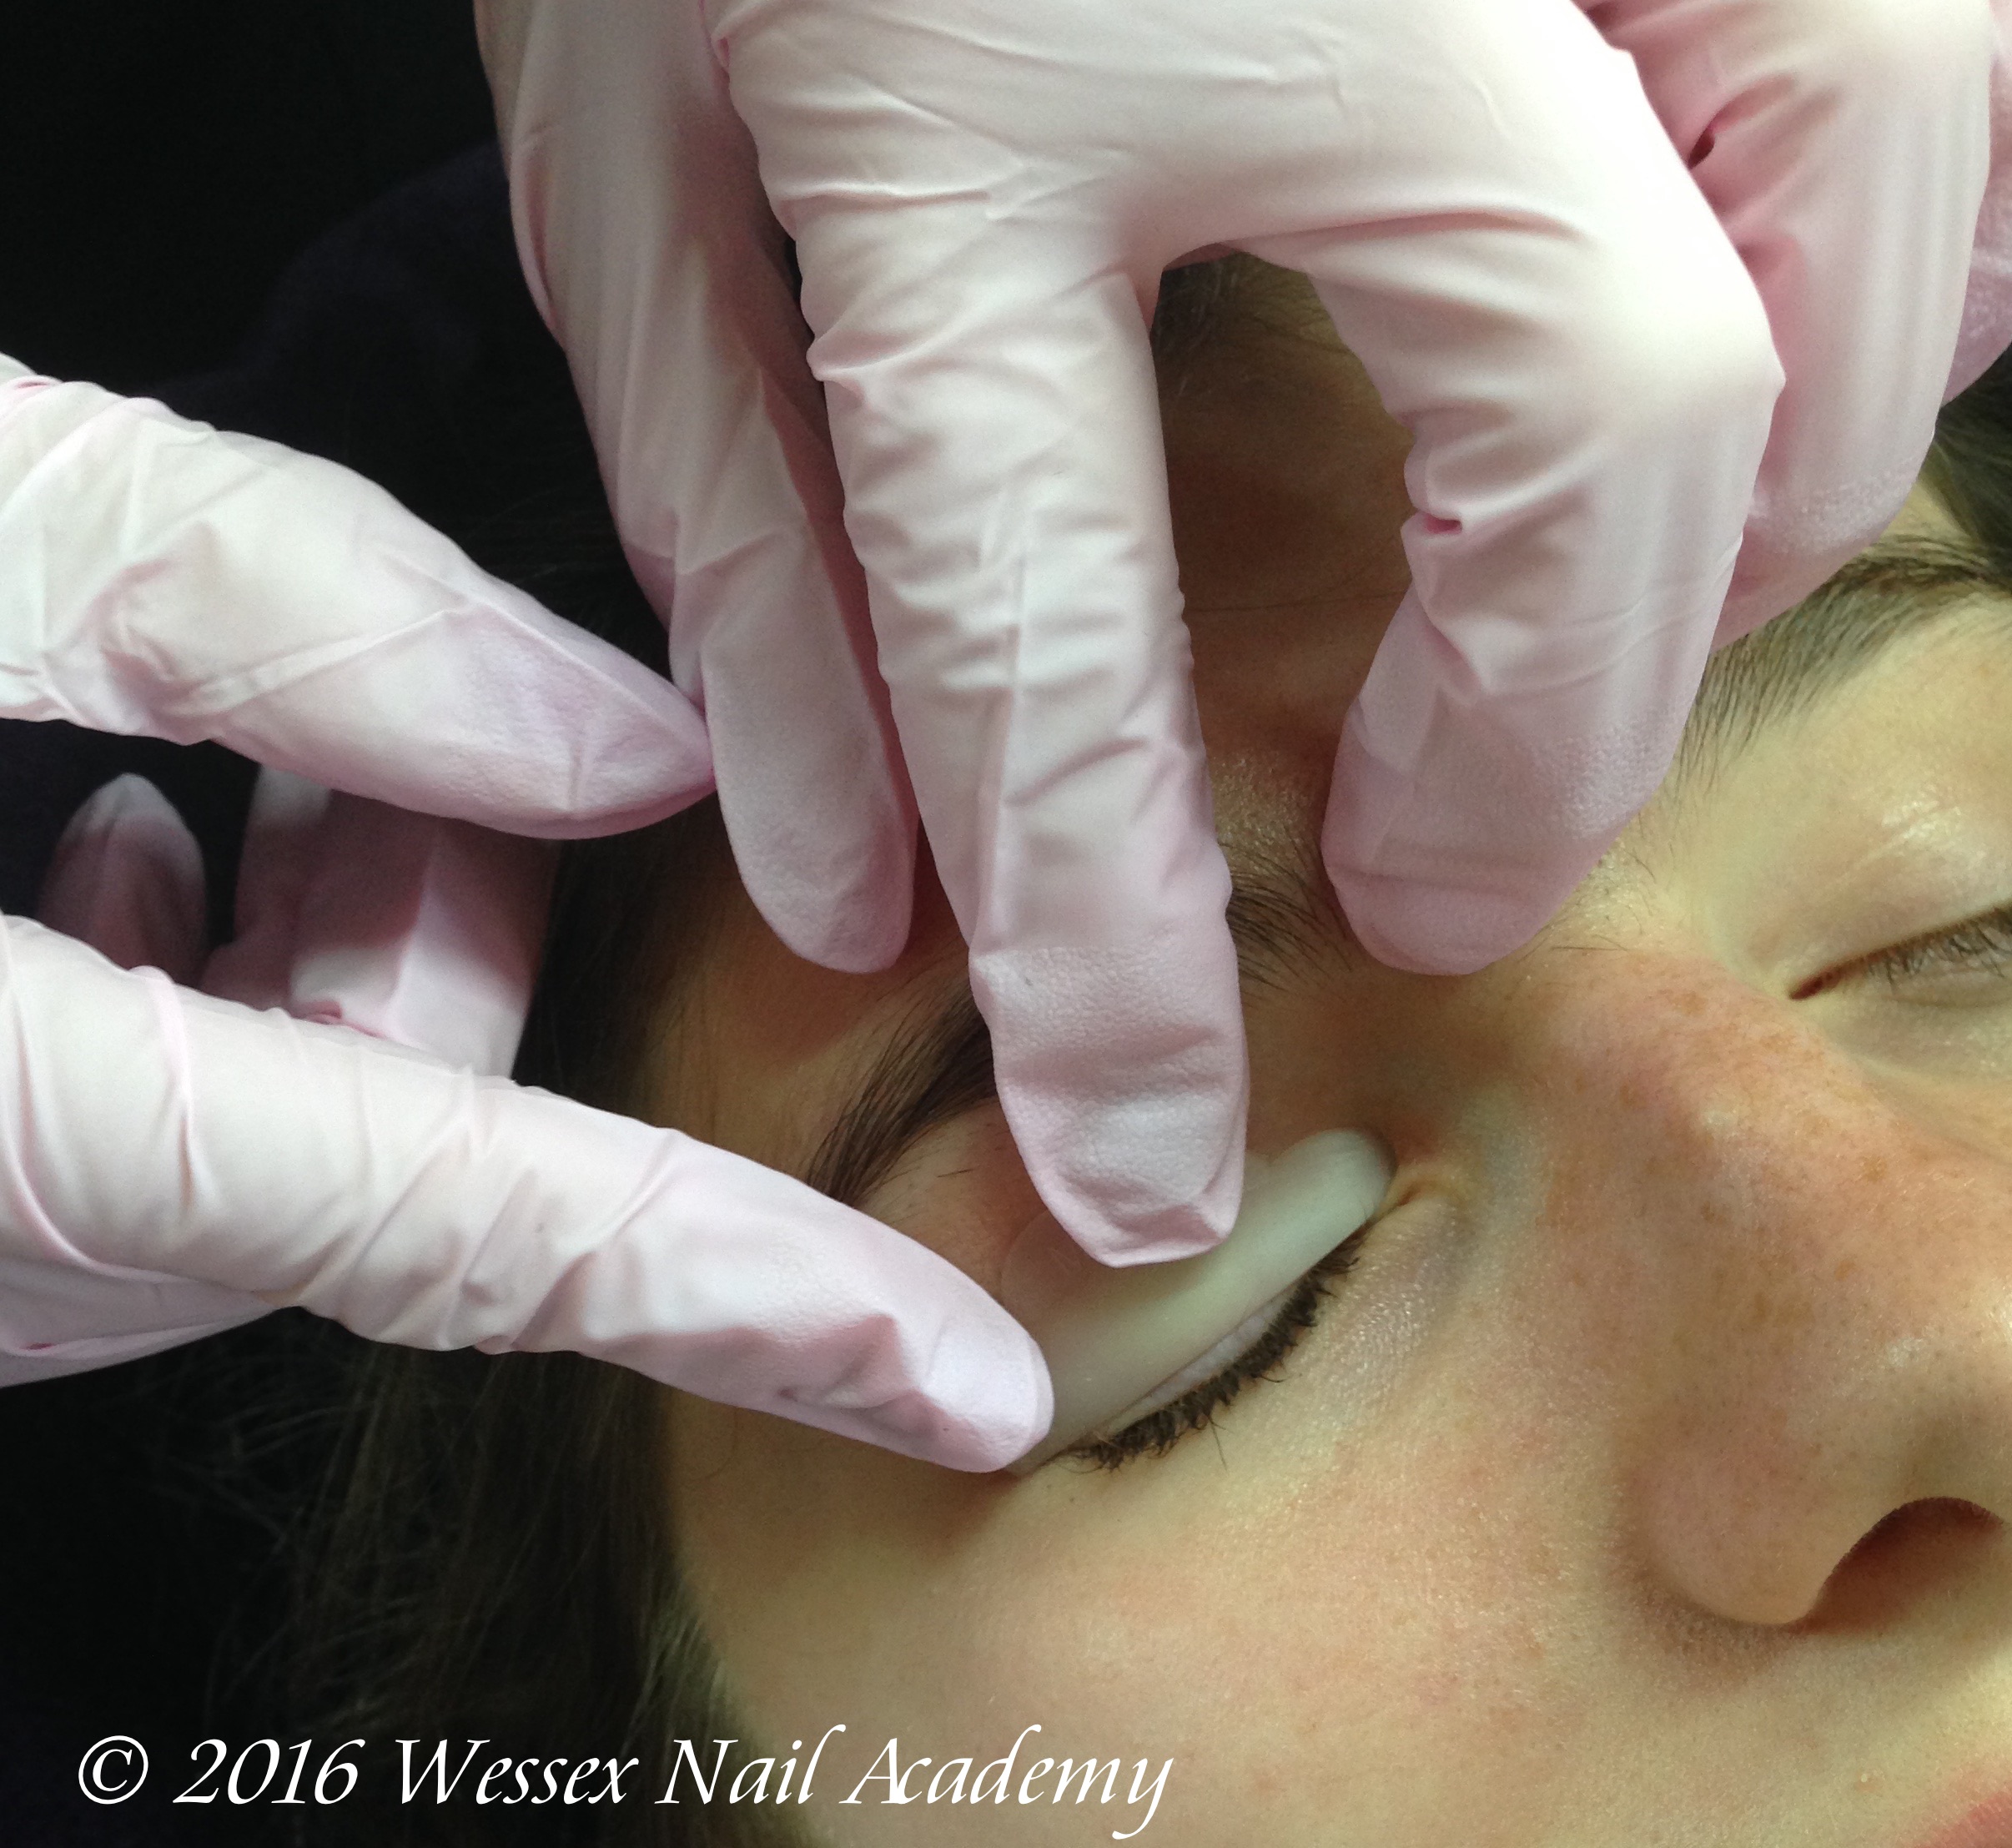 Lash Lifting and Perming Lash and Brow Tinting training course, Wessex Nail Academy Okeford Fitzpaine, Dorset